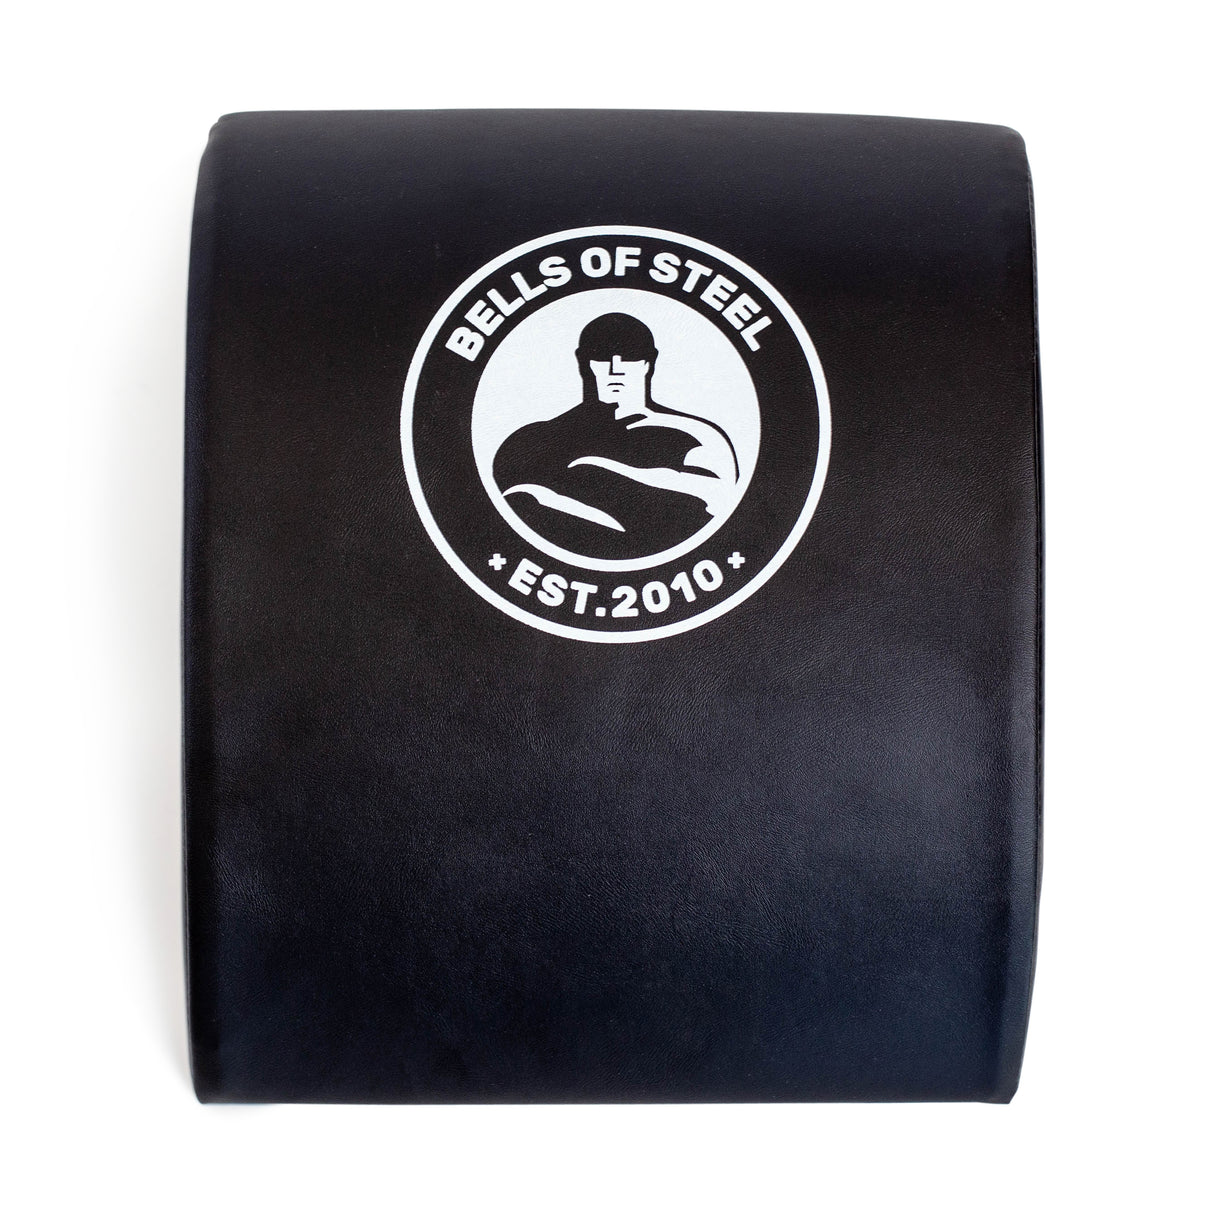 Front view of a black padded mat with BoS logo, perfect for comfortable core workouts.